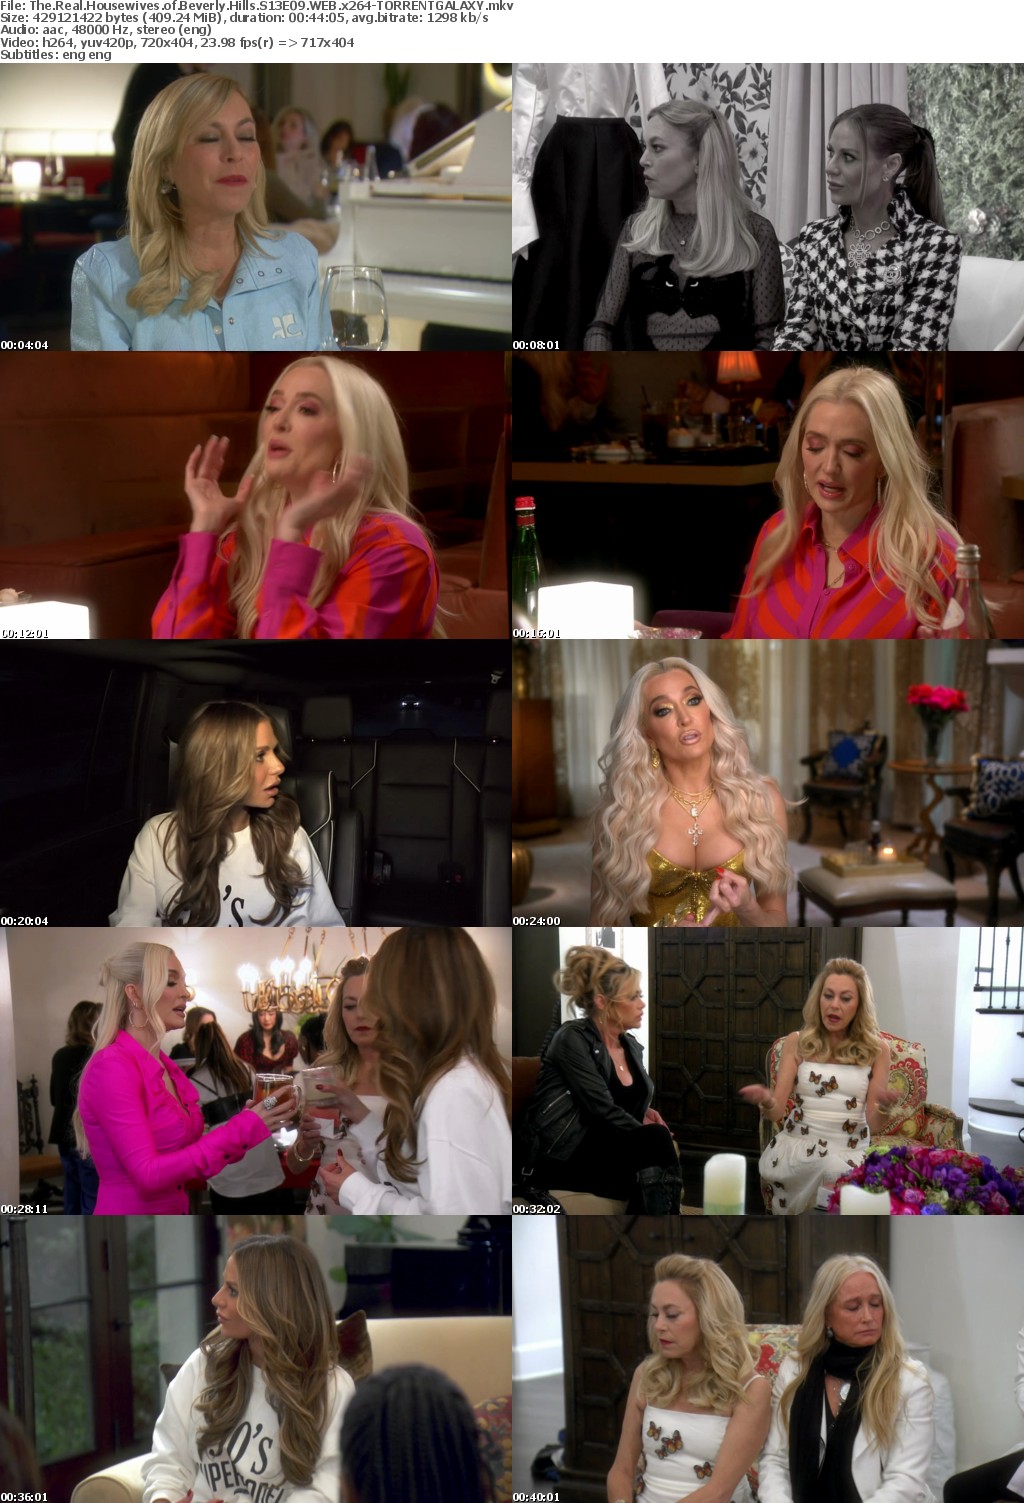 The Real Housewives of Beverly Hills S13E09 WEB x264-GALAXY